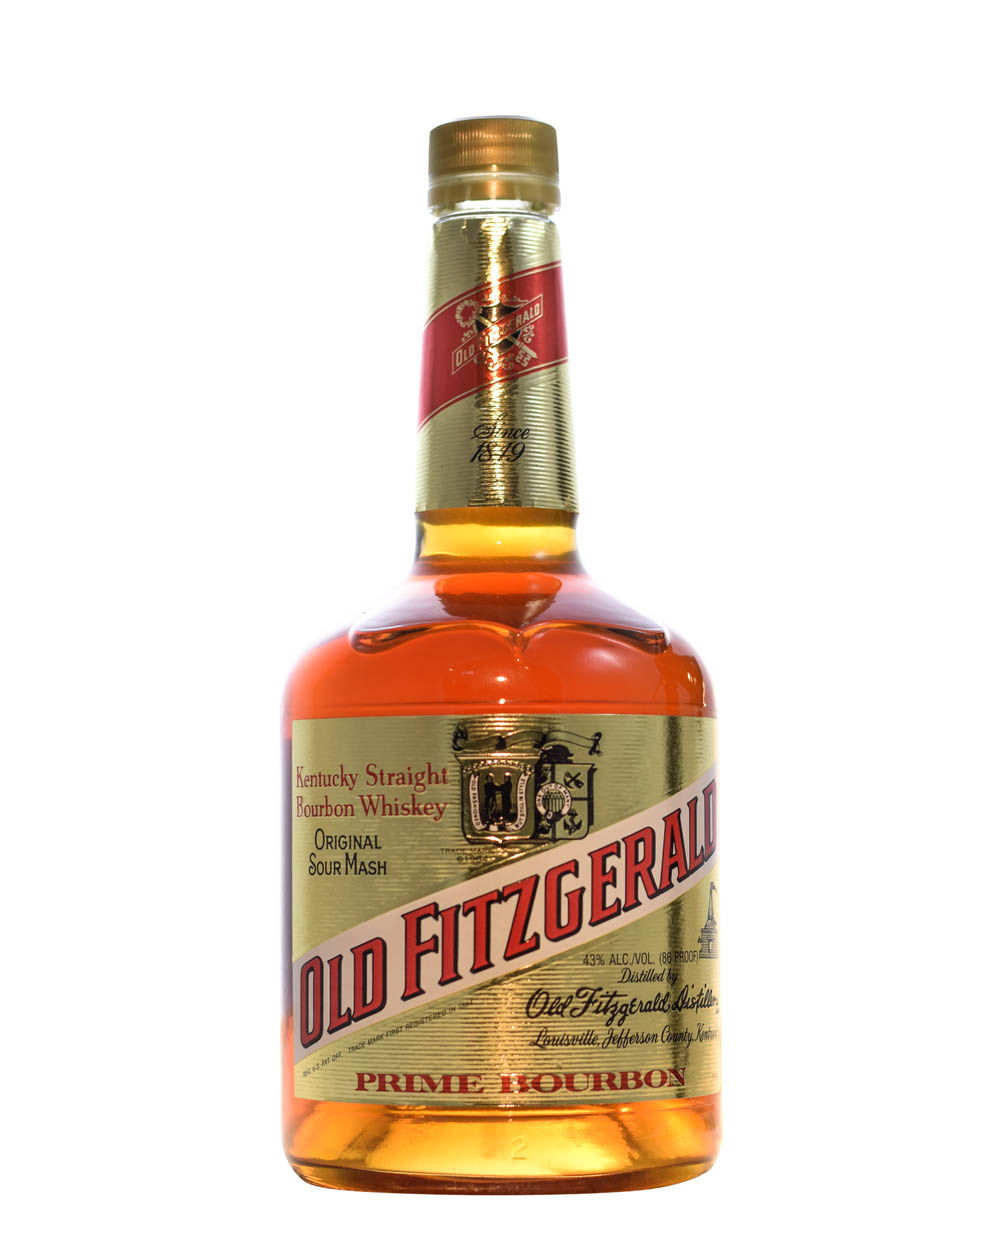 Old Fitzgerald Kentucky Sraight Musthave Malts MHM